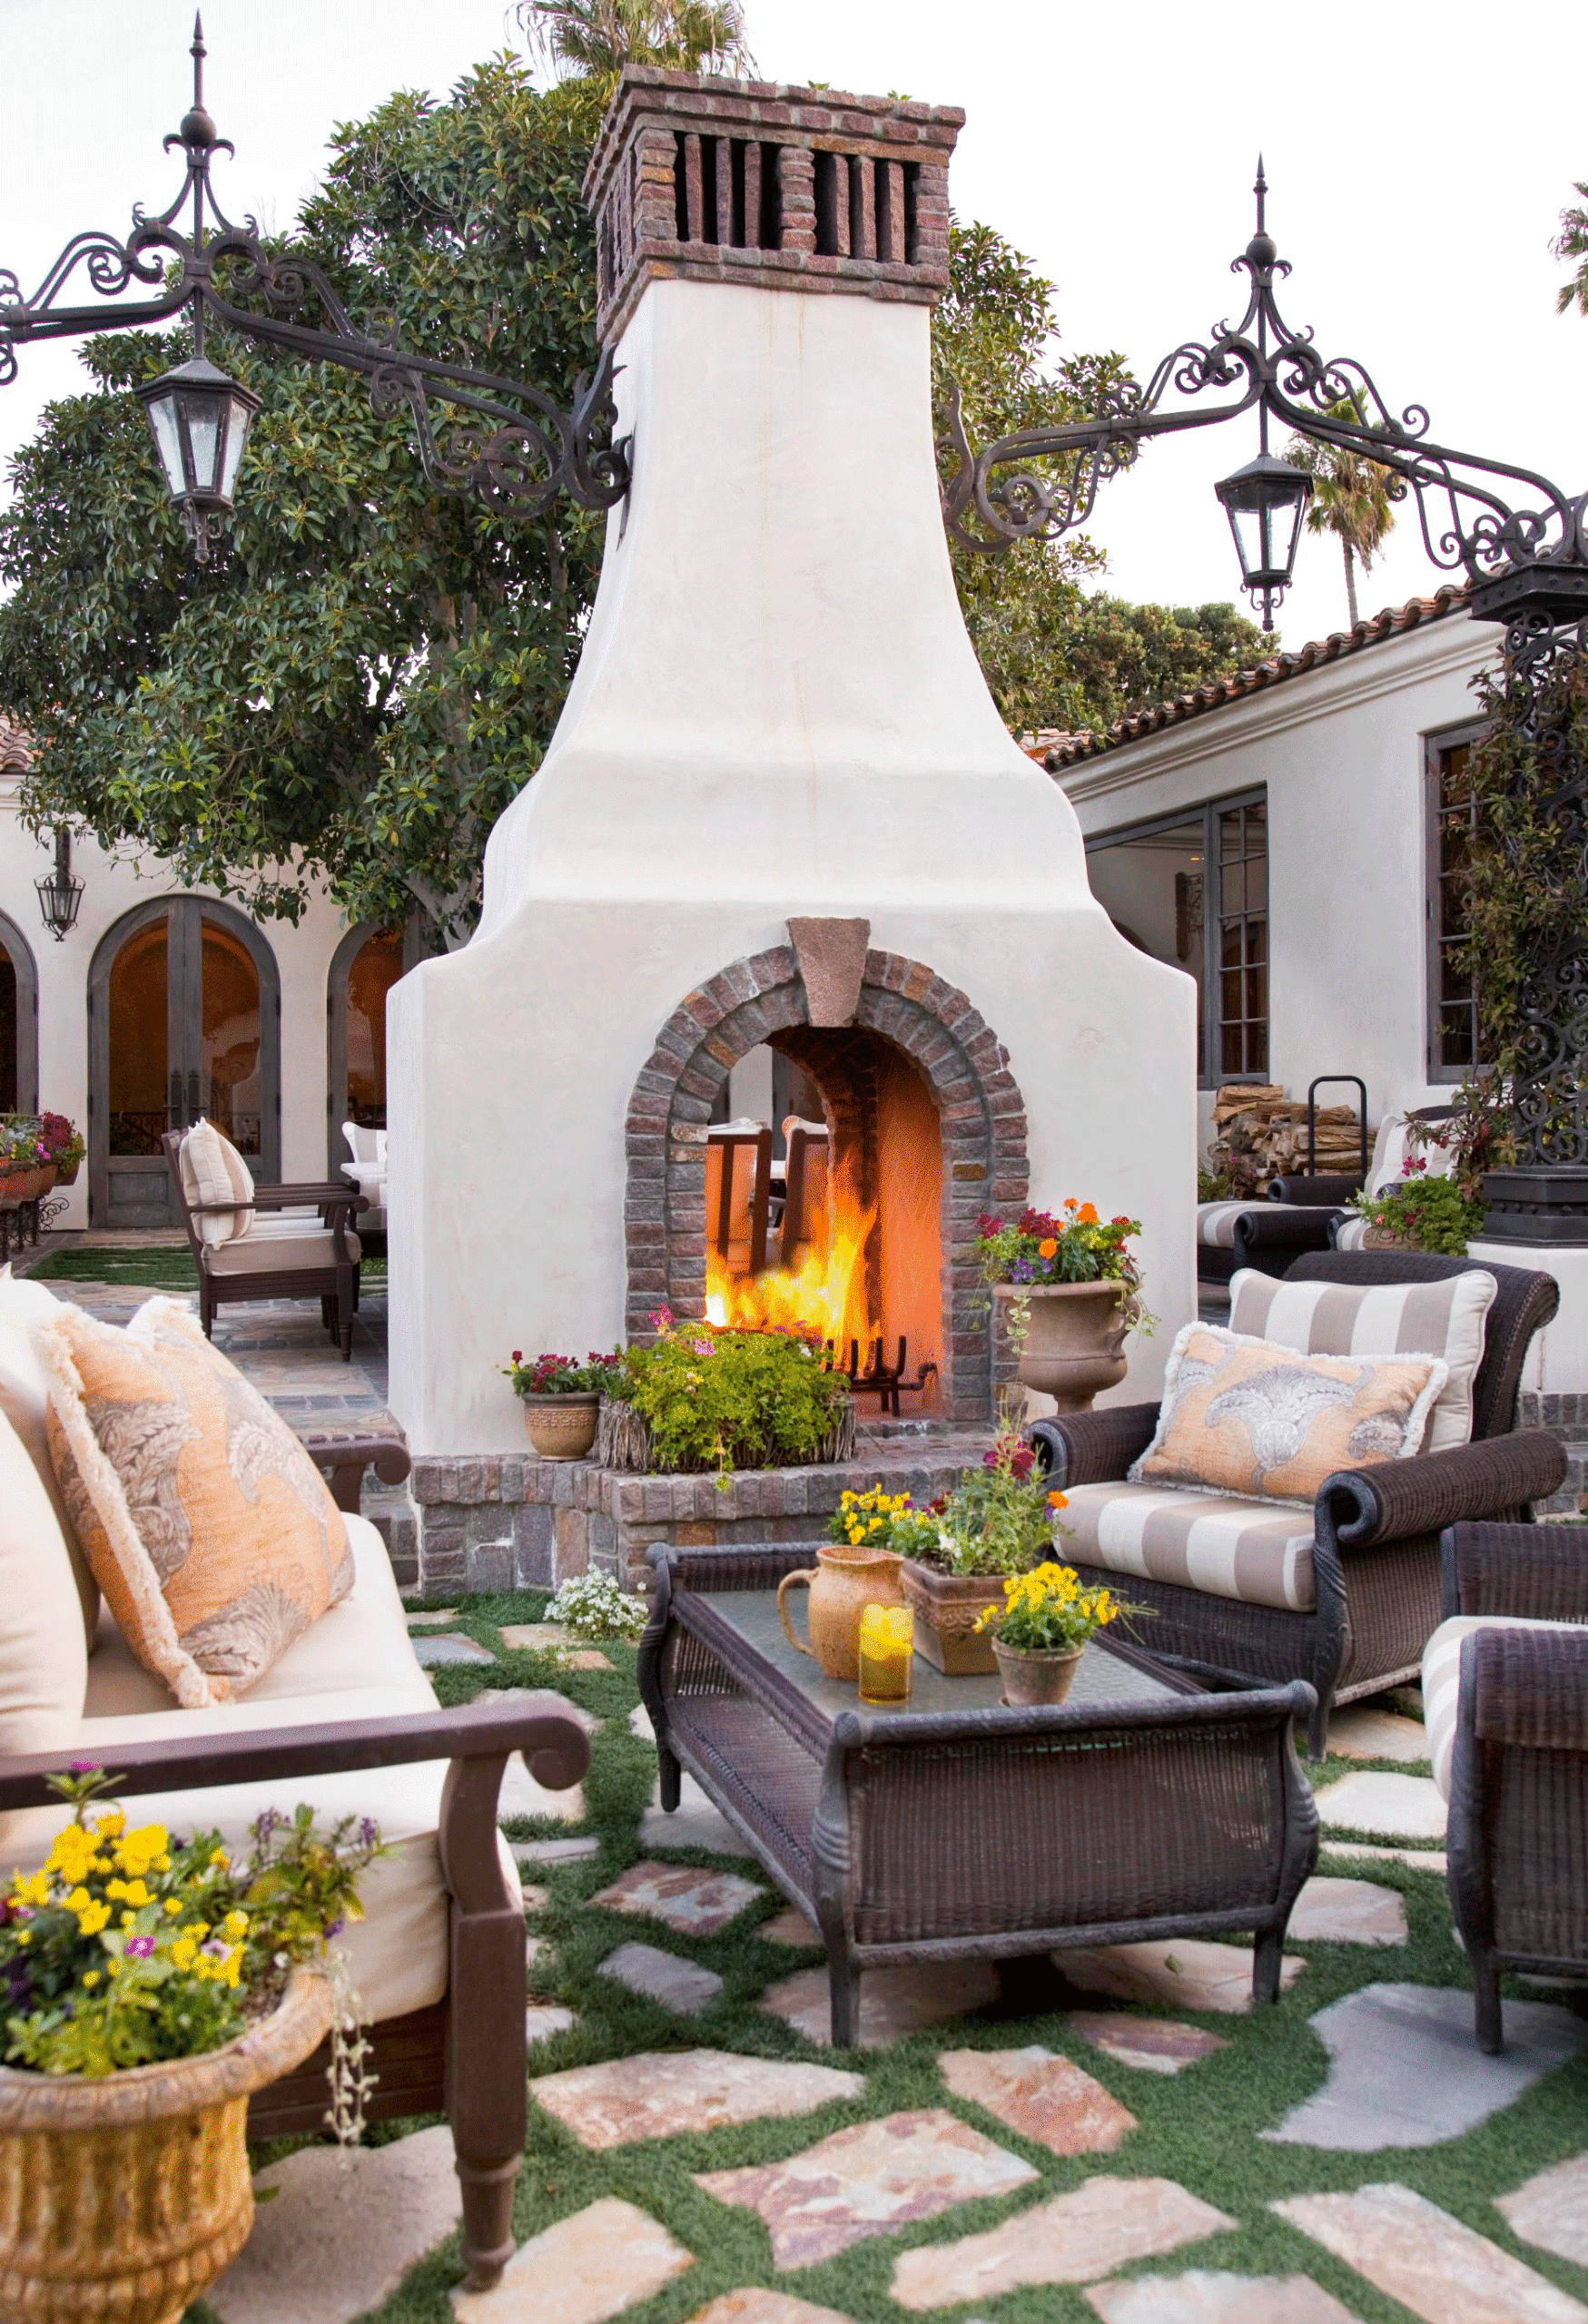 Creative Designs for Outdoor Fireplaces